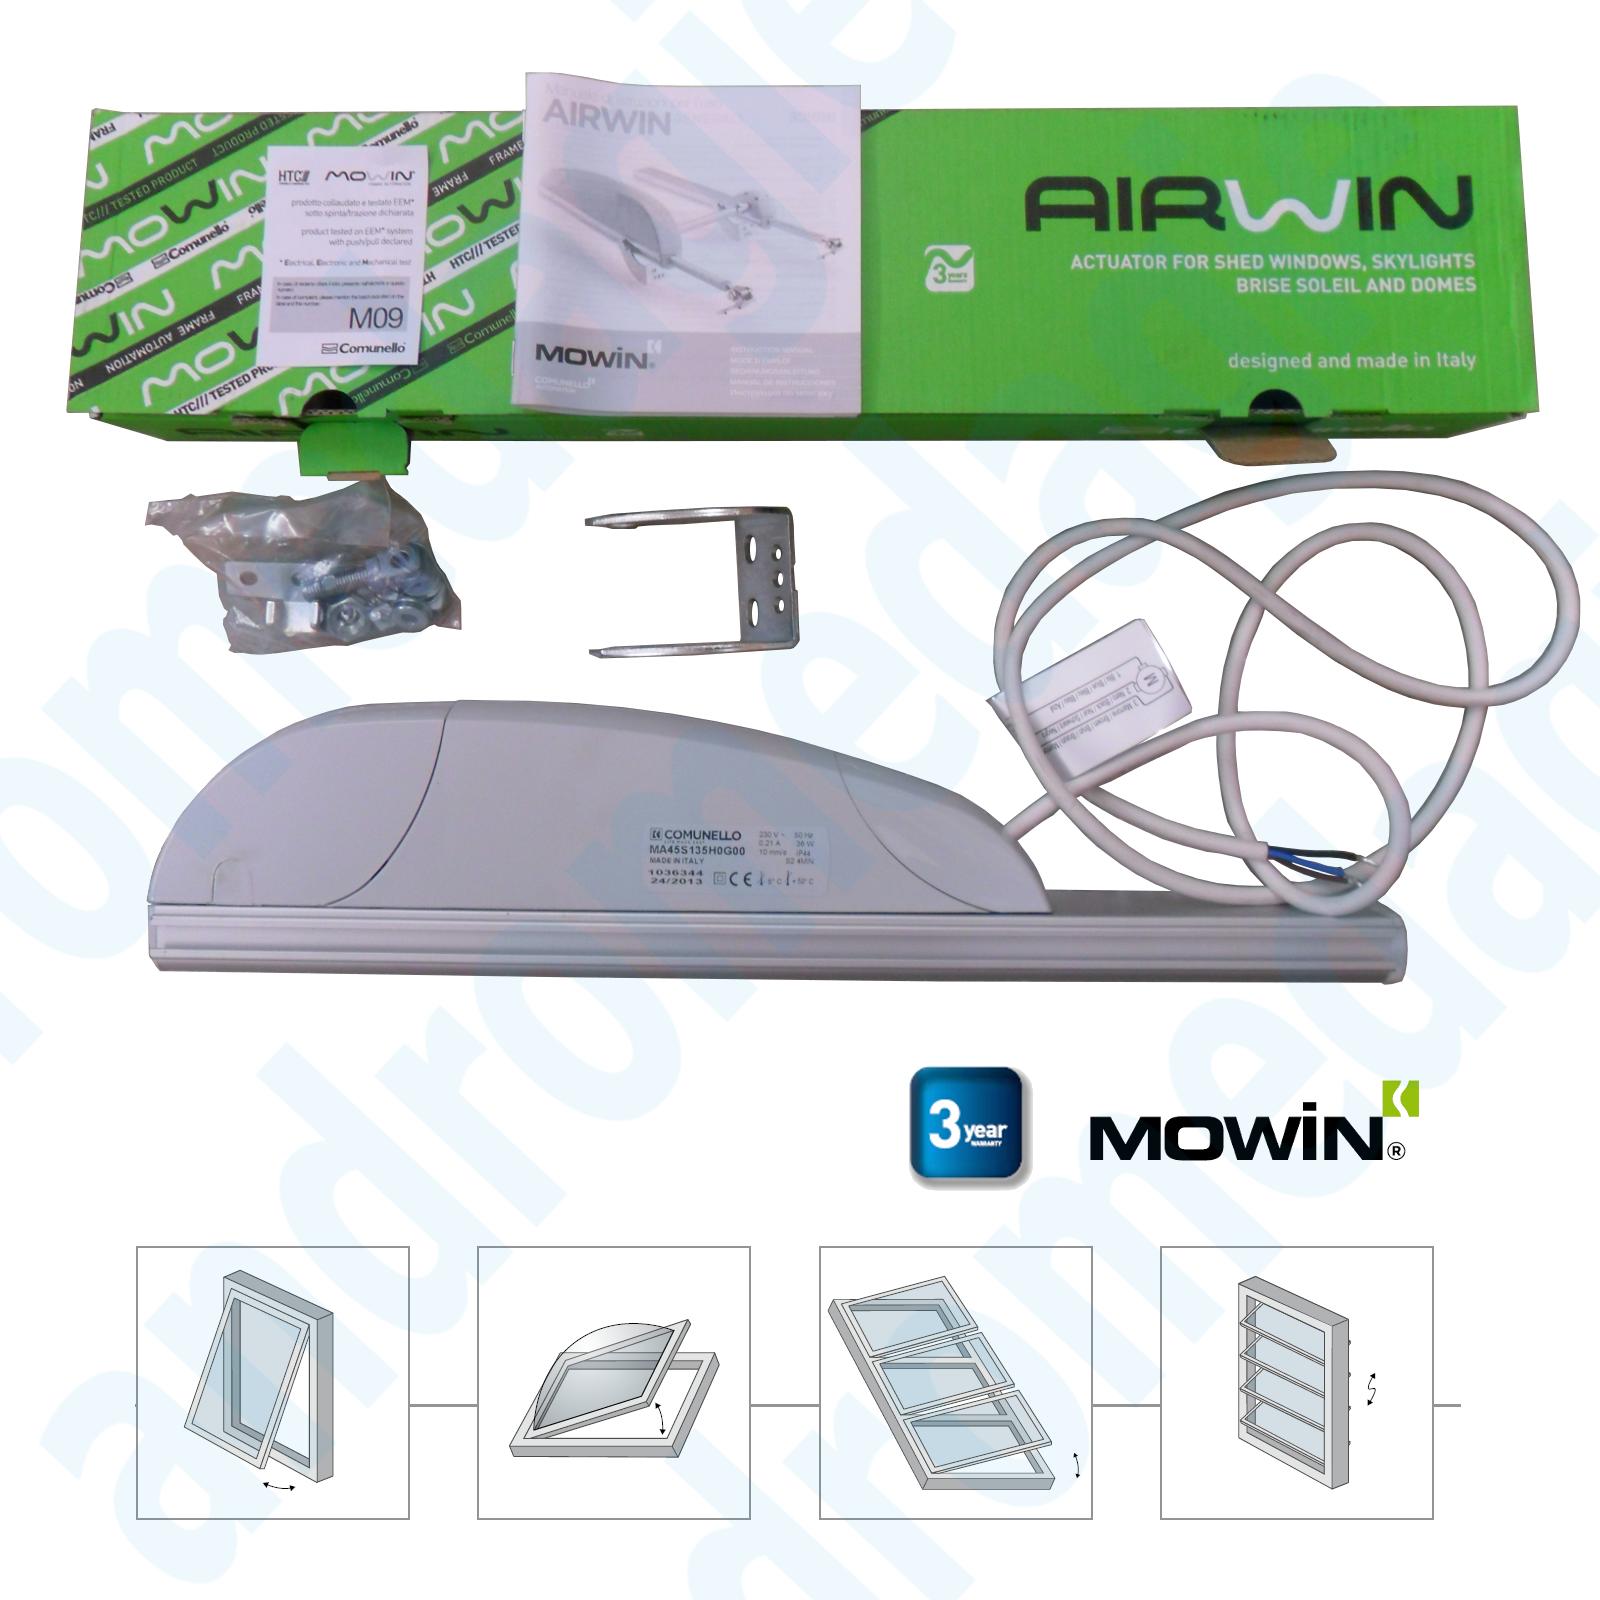 AIRWIN 650N 230V CORSA=750MM Motore a cremagliera per Lucernai Shed Cupole 